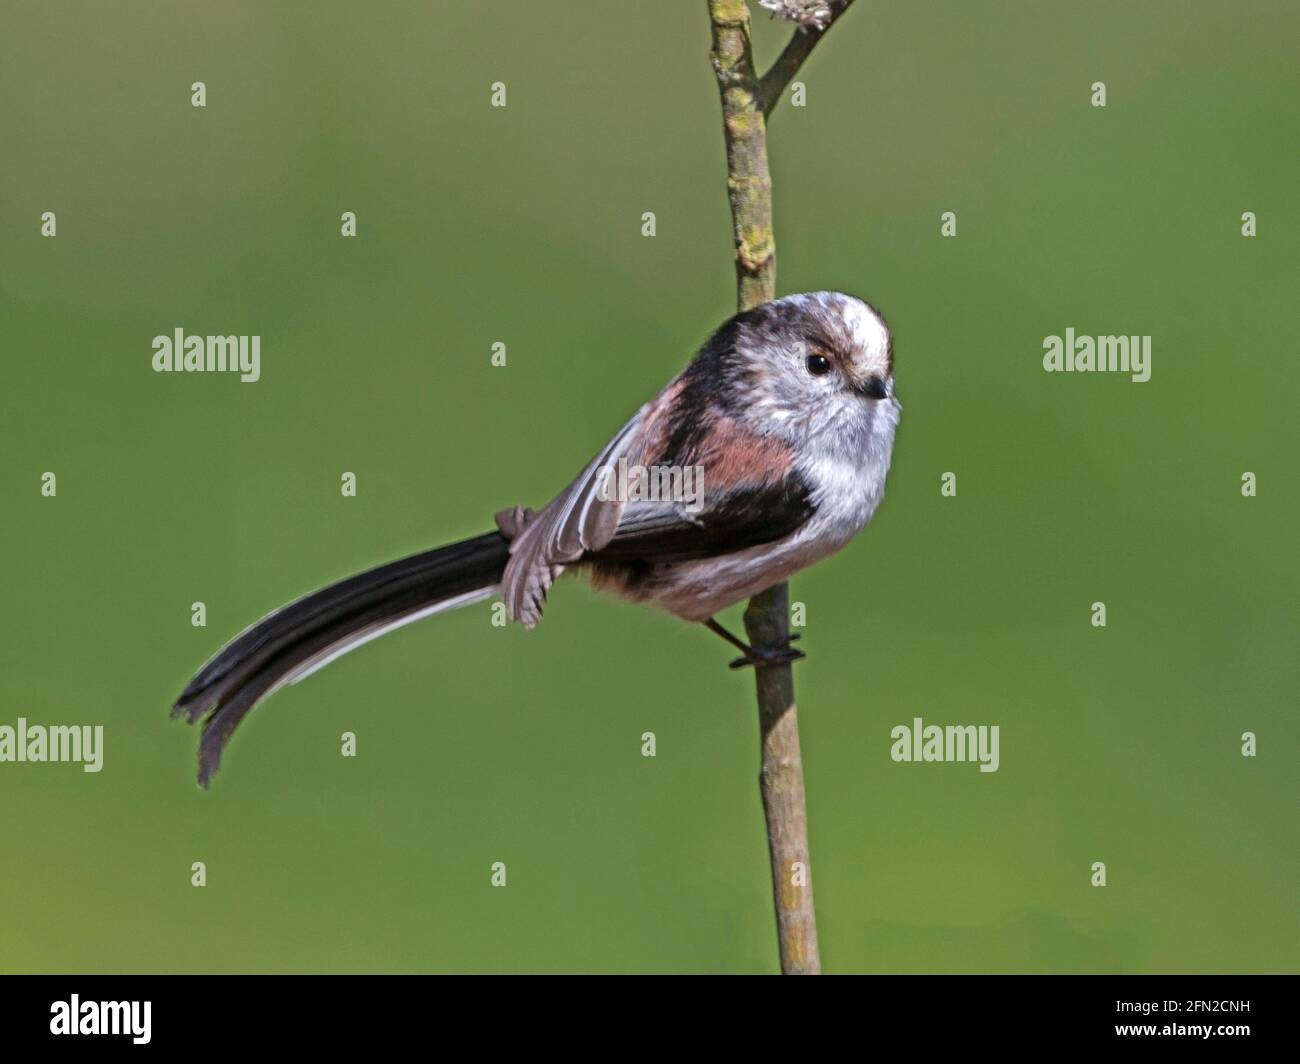 Long-tailed tit perched on branch Stock Photo